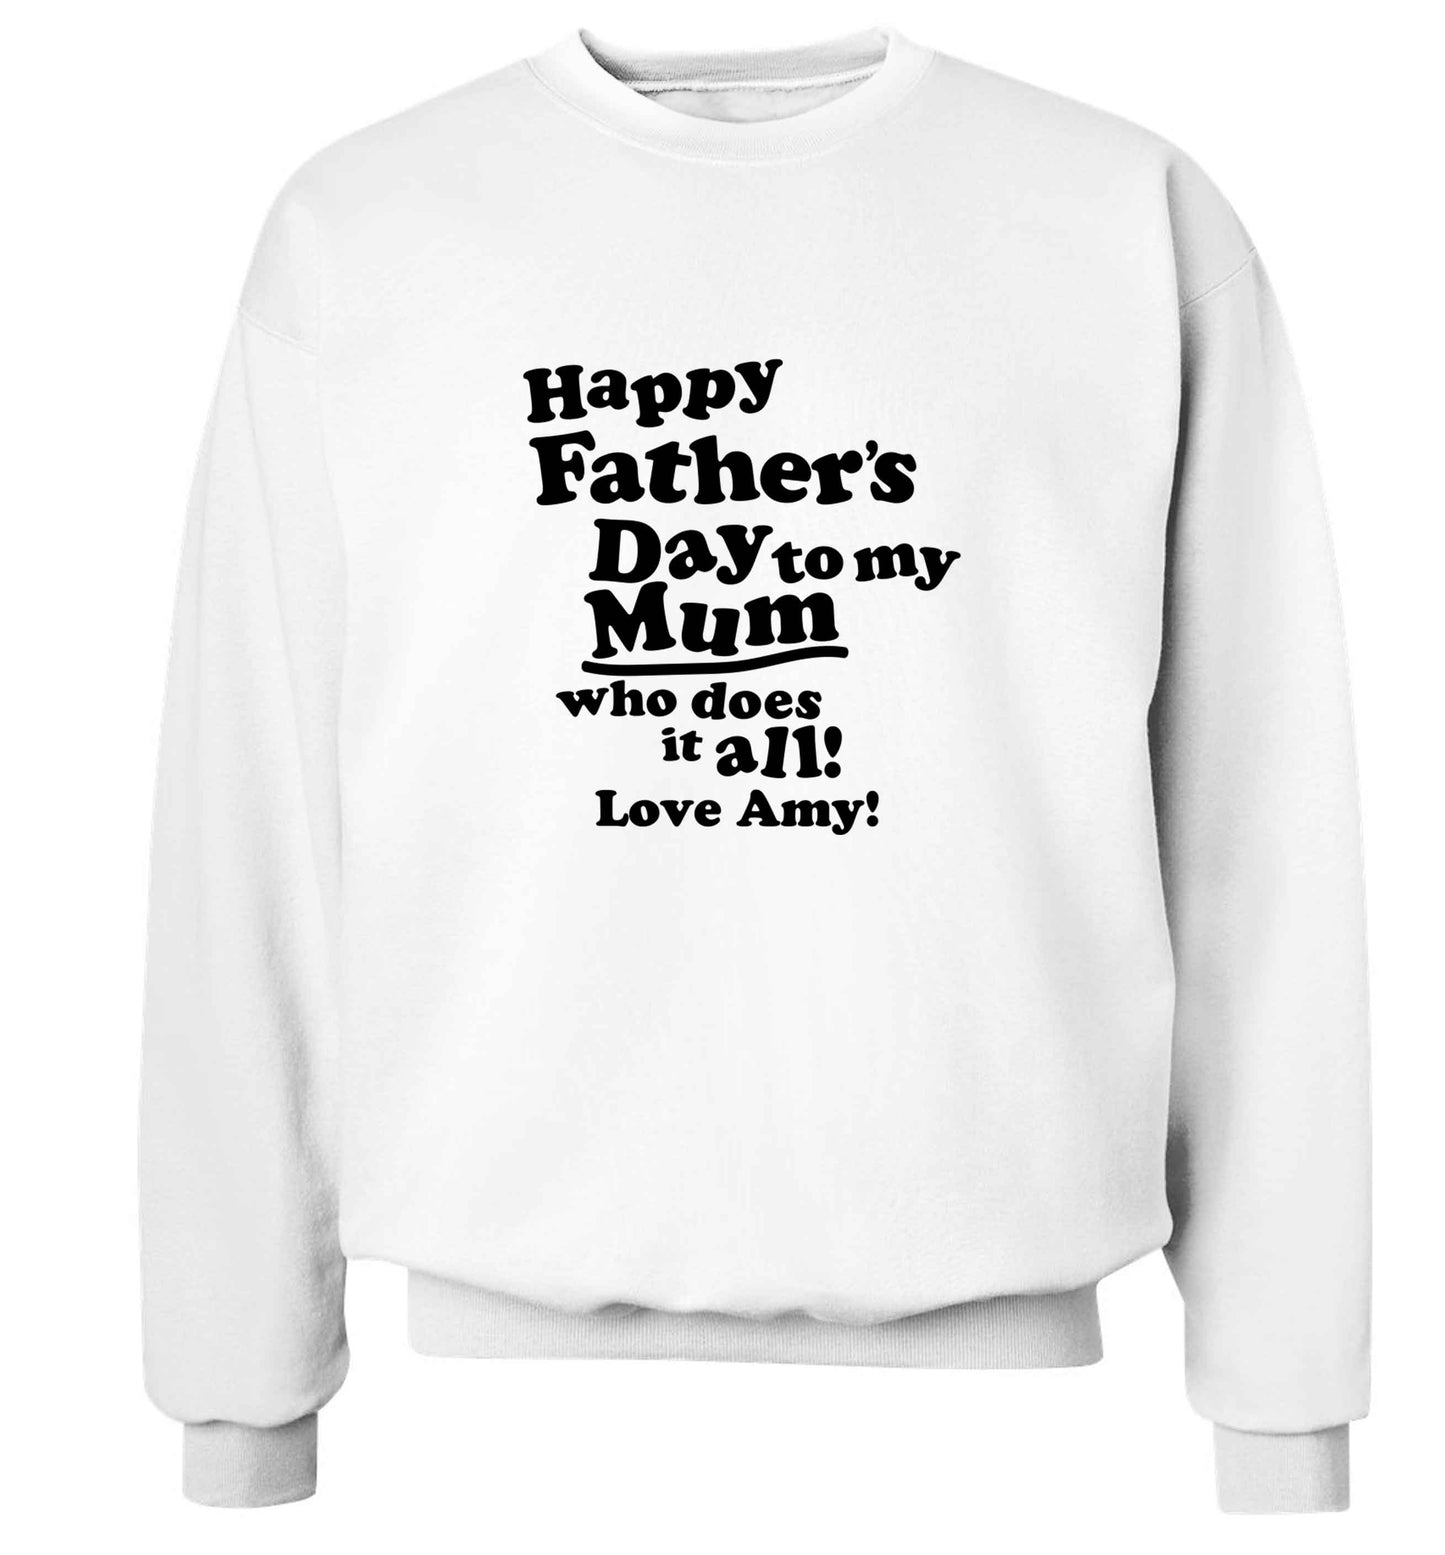 Happy Father's day to my mum who does it all adult's unisex white sweater 2XL